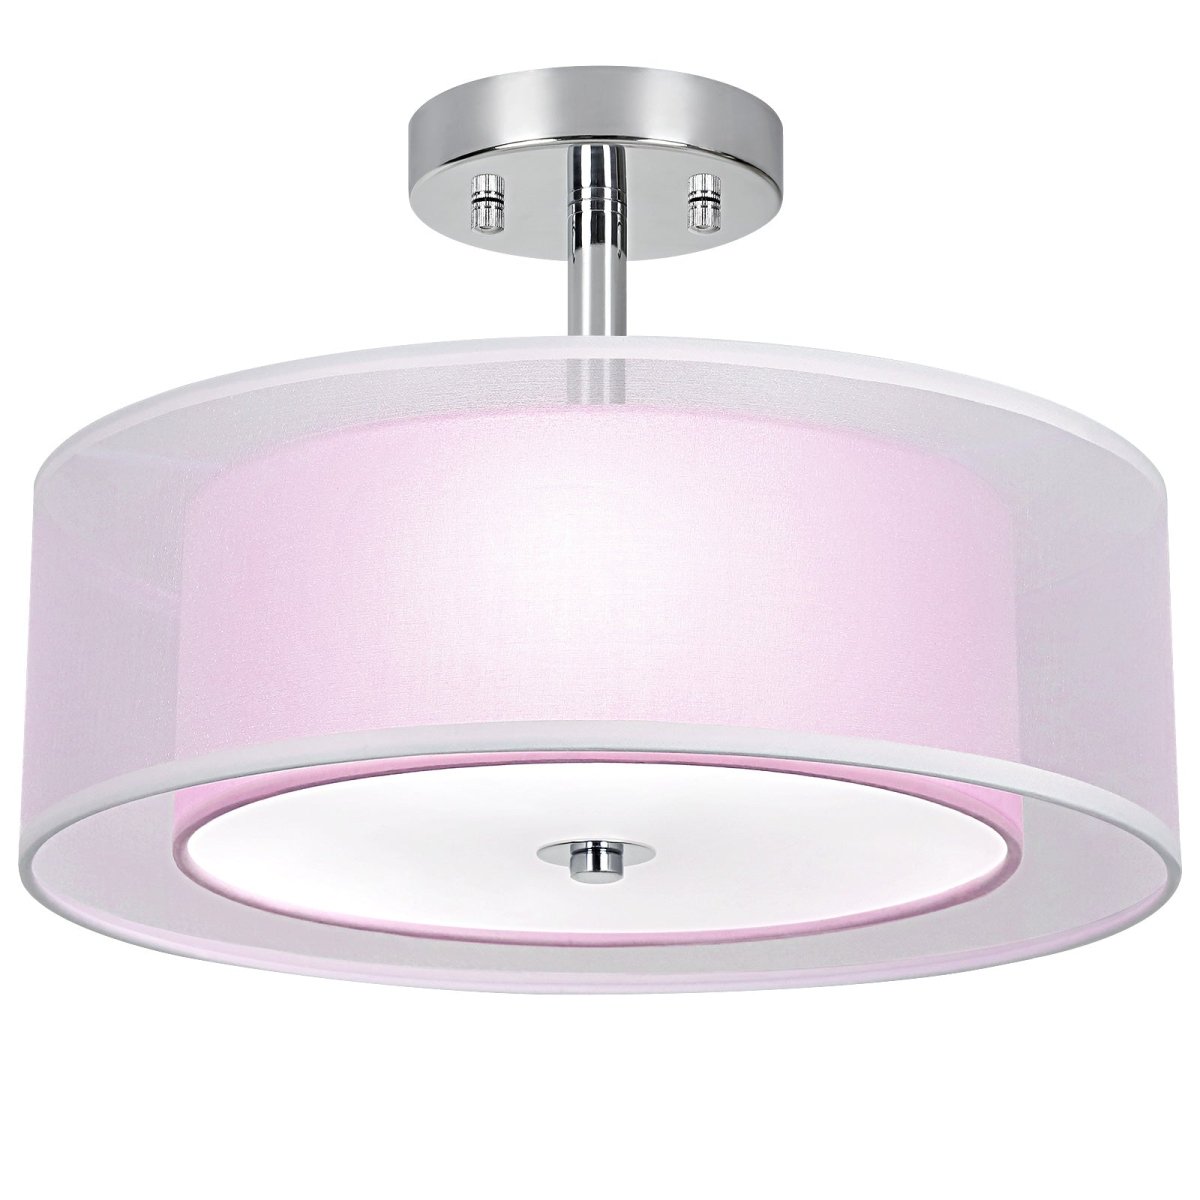 DLLT 15 Inch Pink Drum Light Fixtures with Double Fabric Shade, 3-Light Semi Flush Mount Ceiling Light Fixture, Modern Pendant Light Hanging for Living Room Bedroom Kitchen Dining Room Hallway Entryway - WS-FNC52-60B 1 | DEPULEY